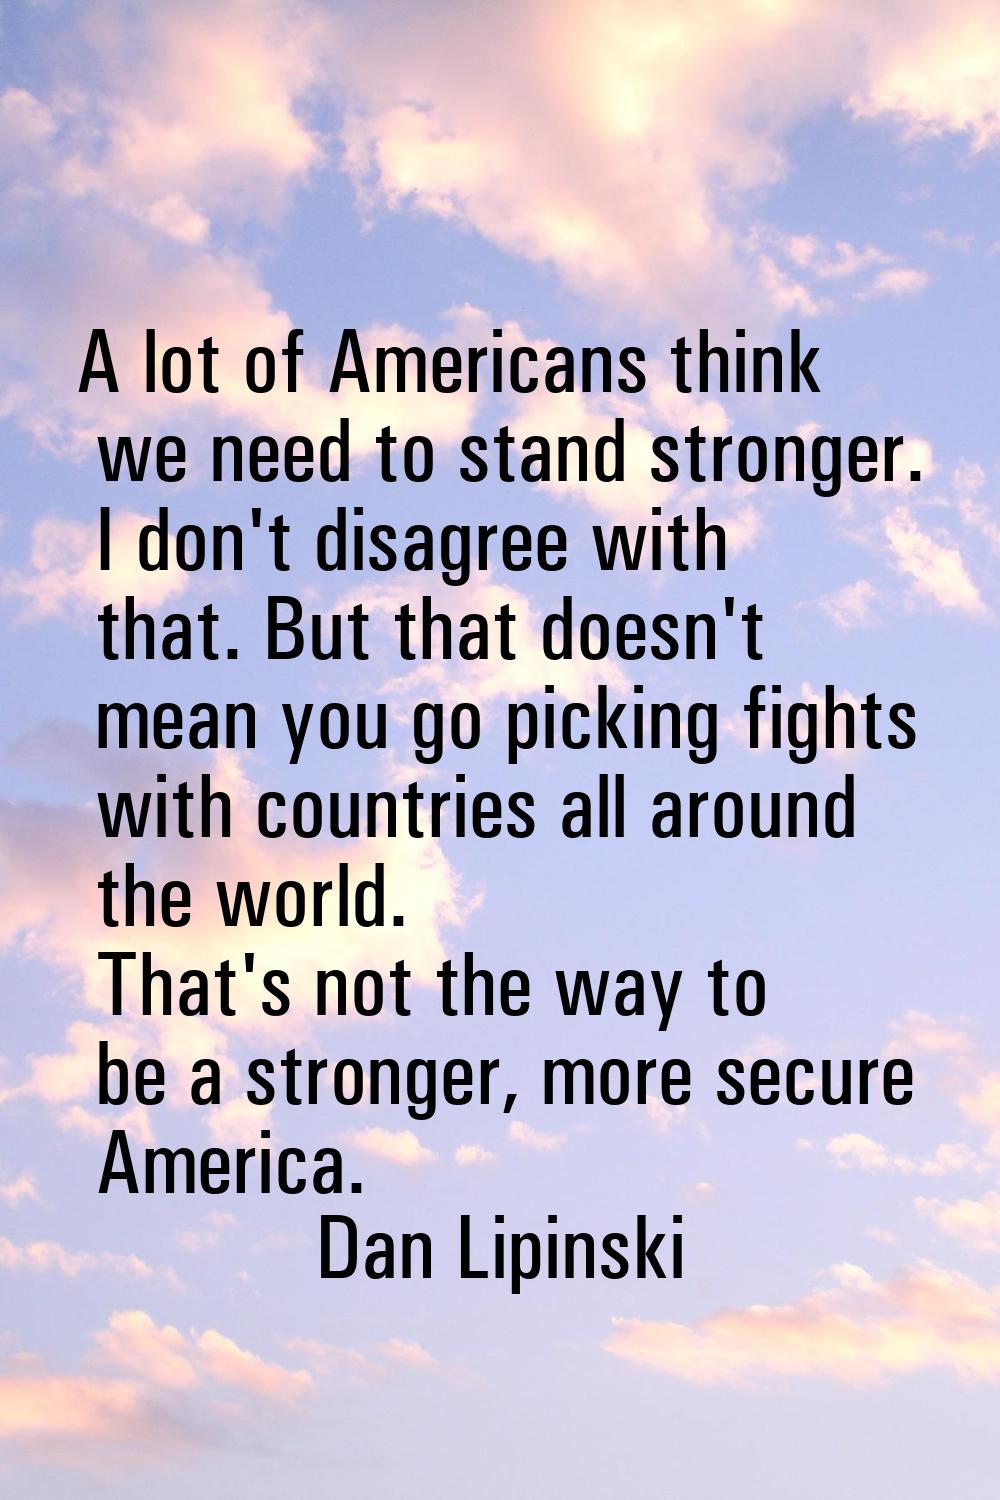 A lot of Americans think we need to stand stronger. I don't disagree with that. But that doesn't me